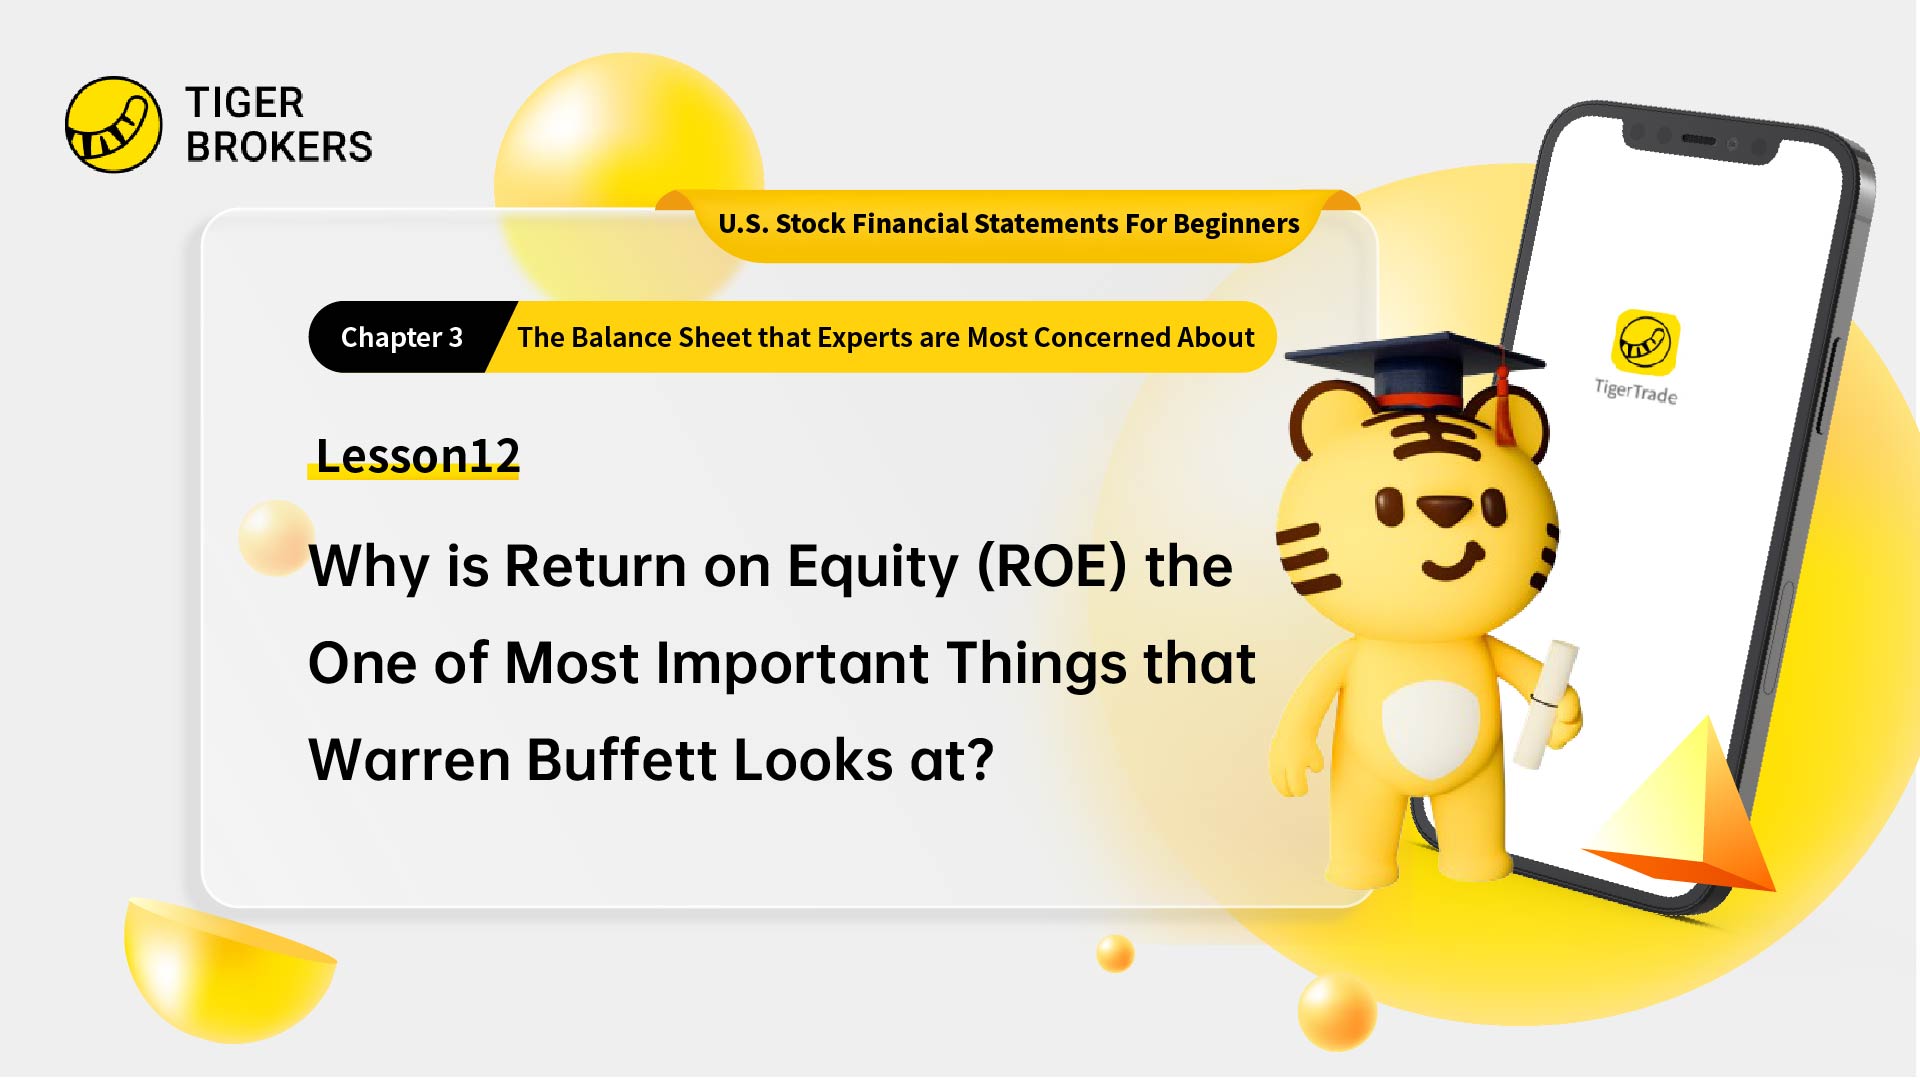 Lesson12:  The importance of return on equity (ROE)